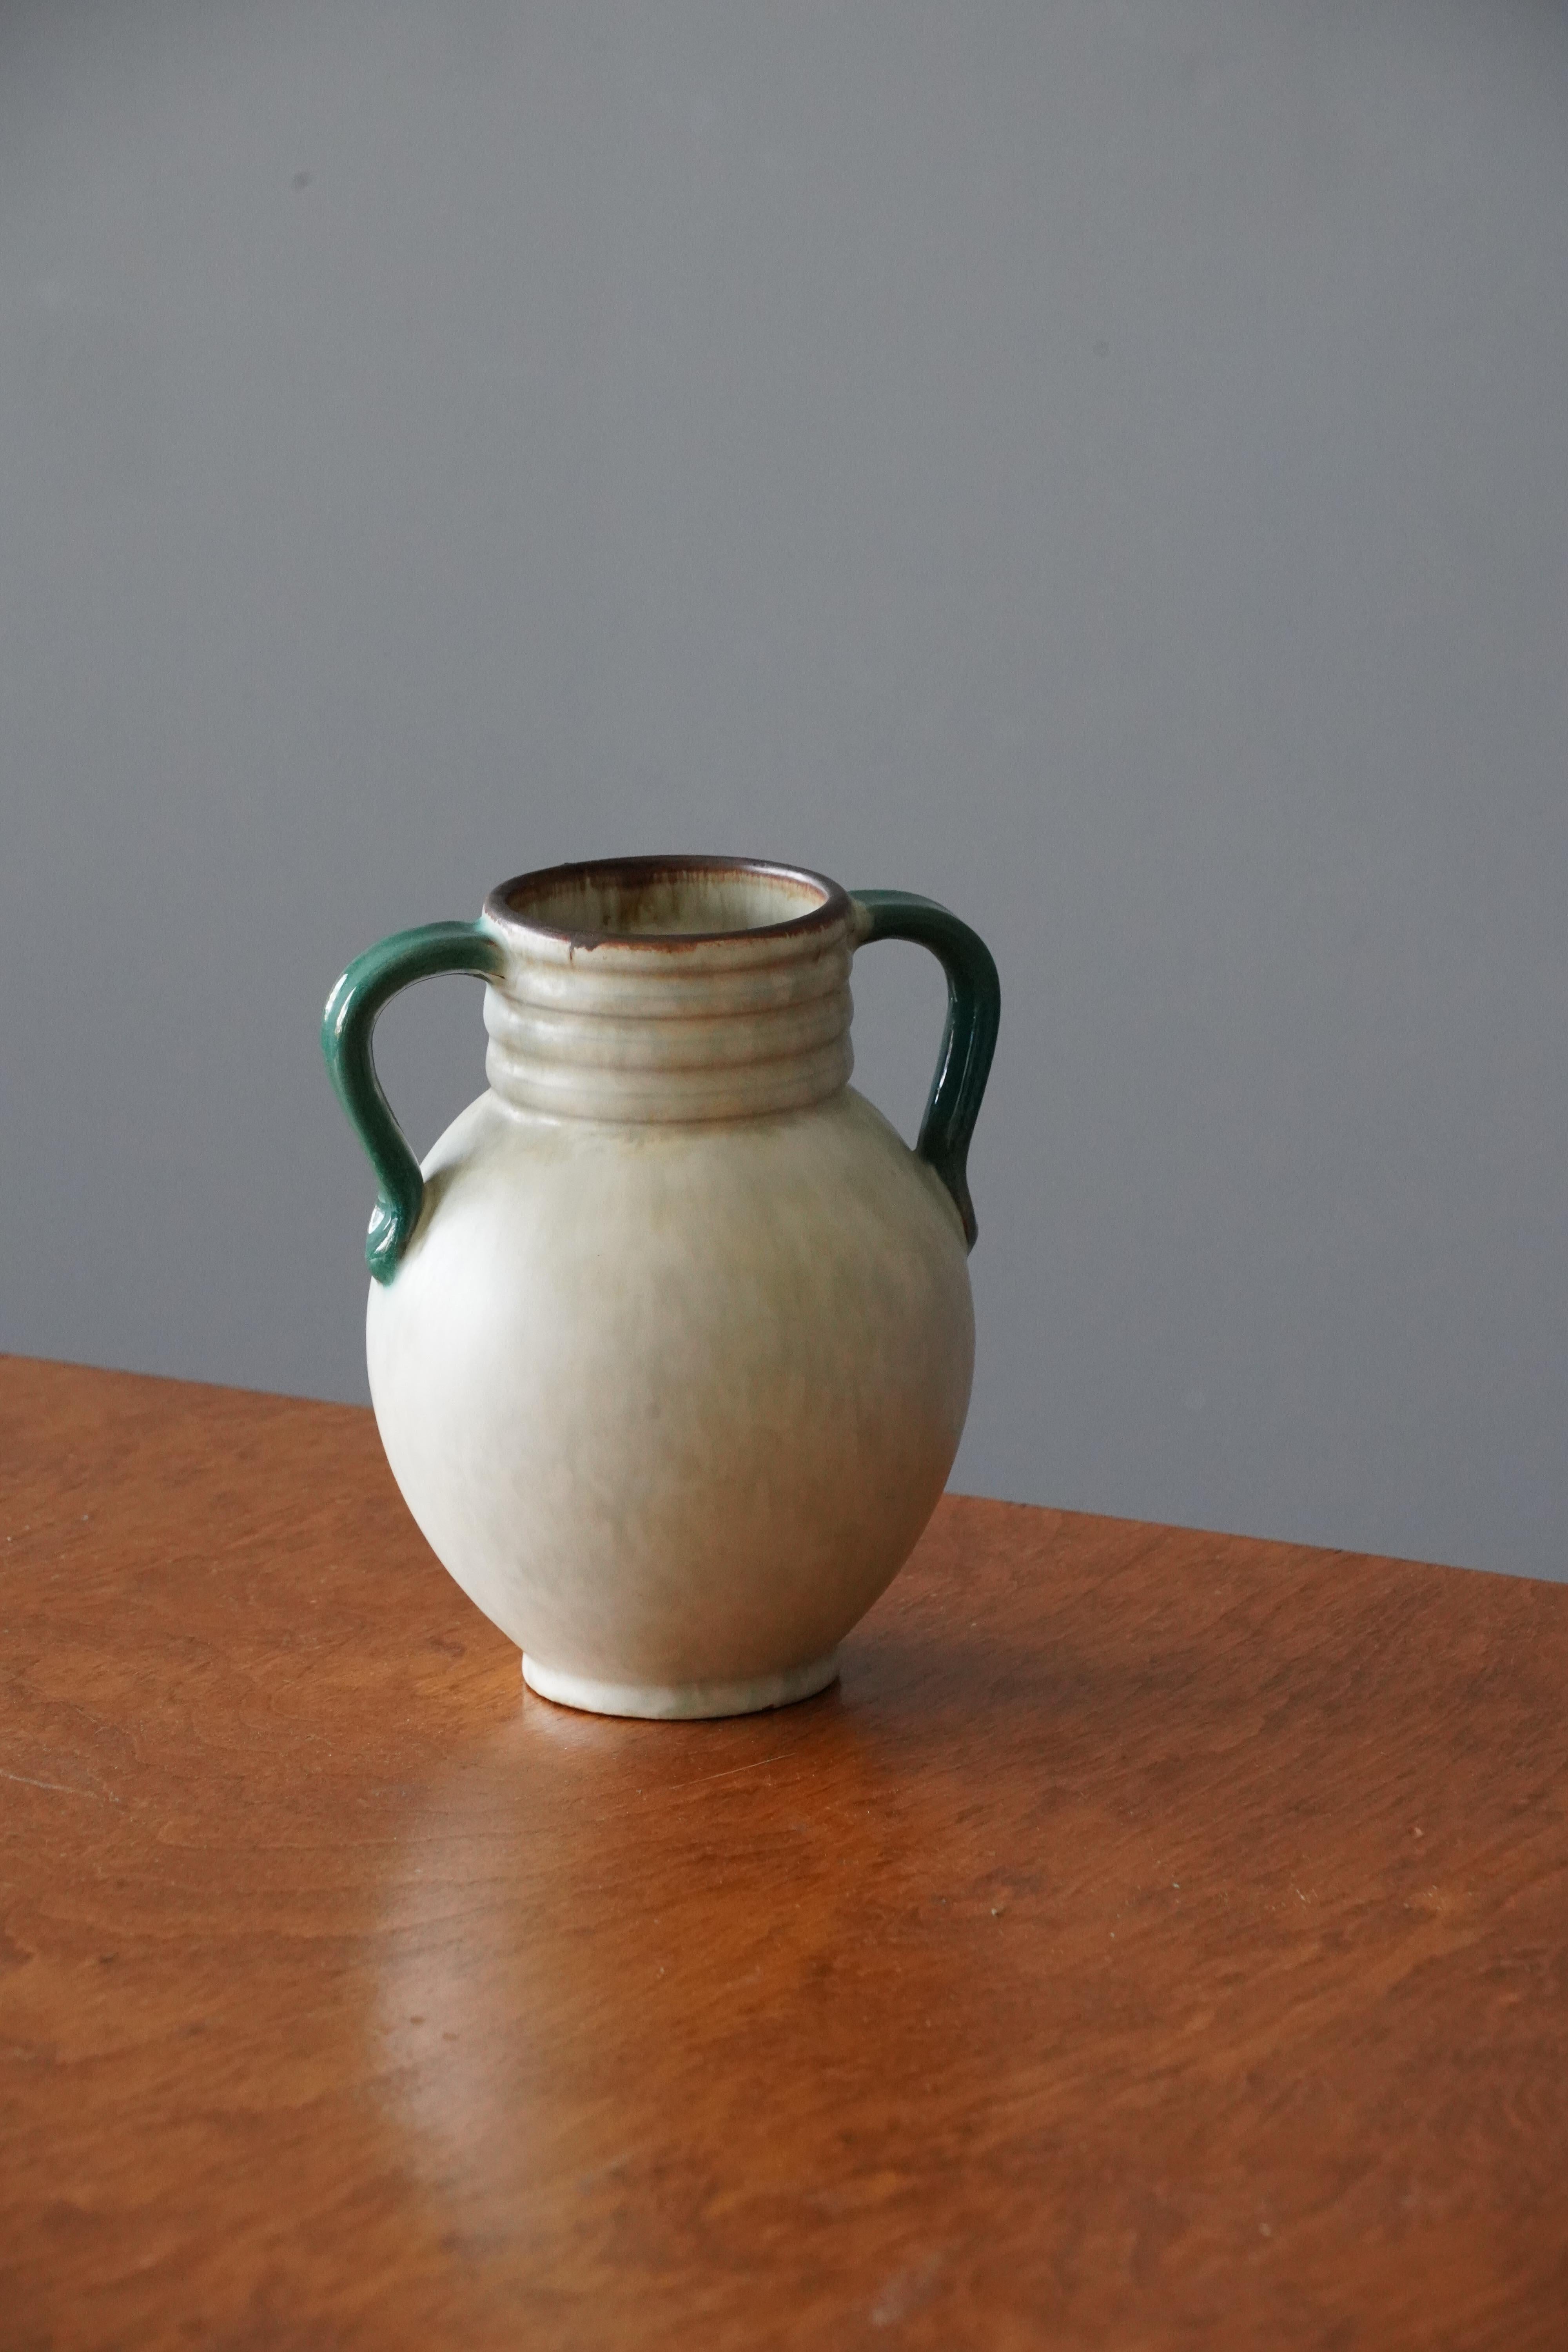 A vase. Produced by Upsala-Ekeby, Sweden, 1940s. Earthenware.

Other designers of the period include Ettore Sottsass, Carl Harry Stålhane, Lisa Larsson, Axel Salto, and Arne Bang.